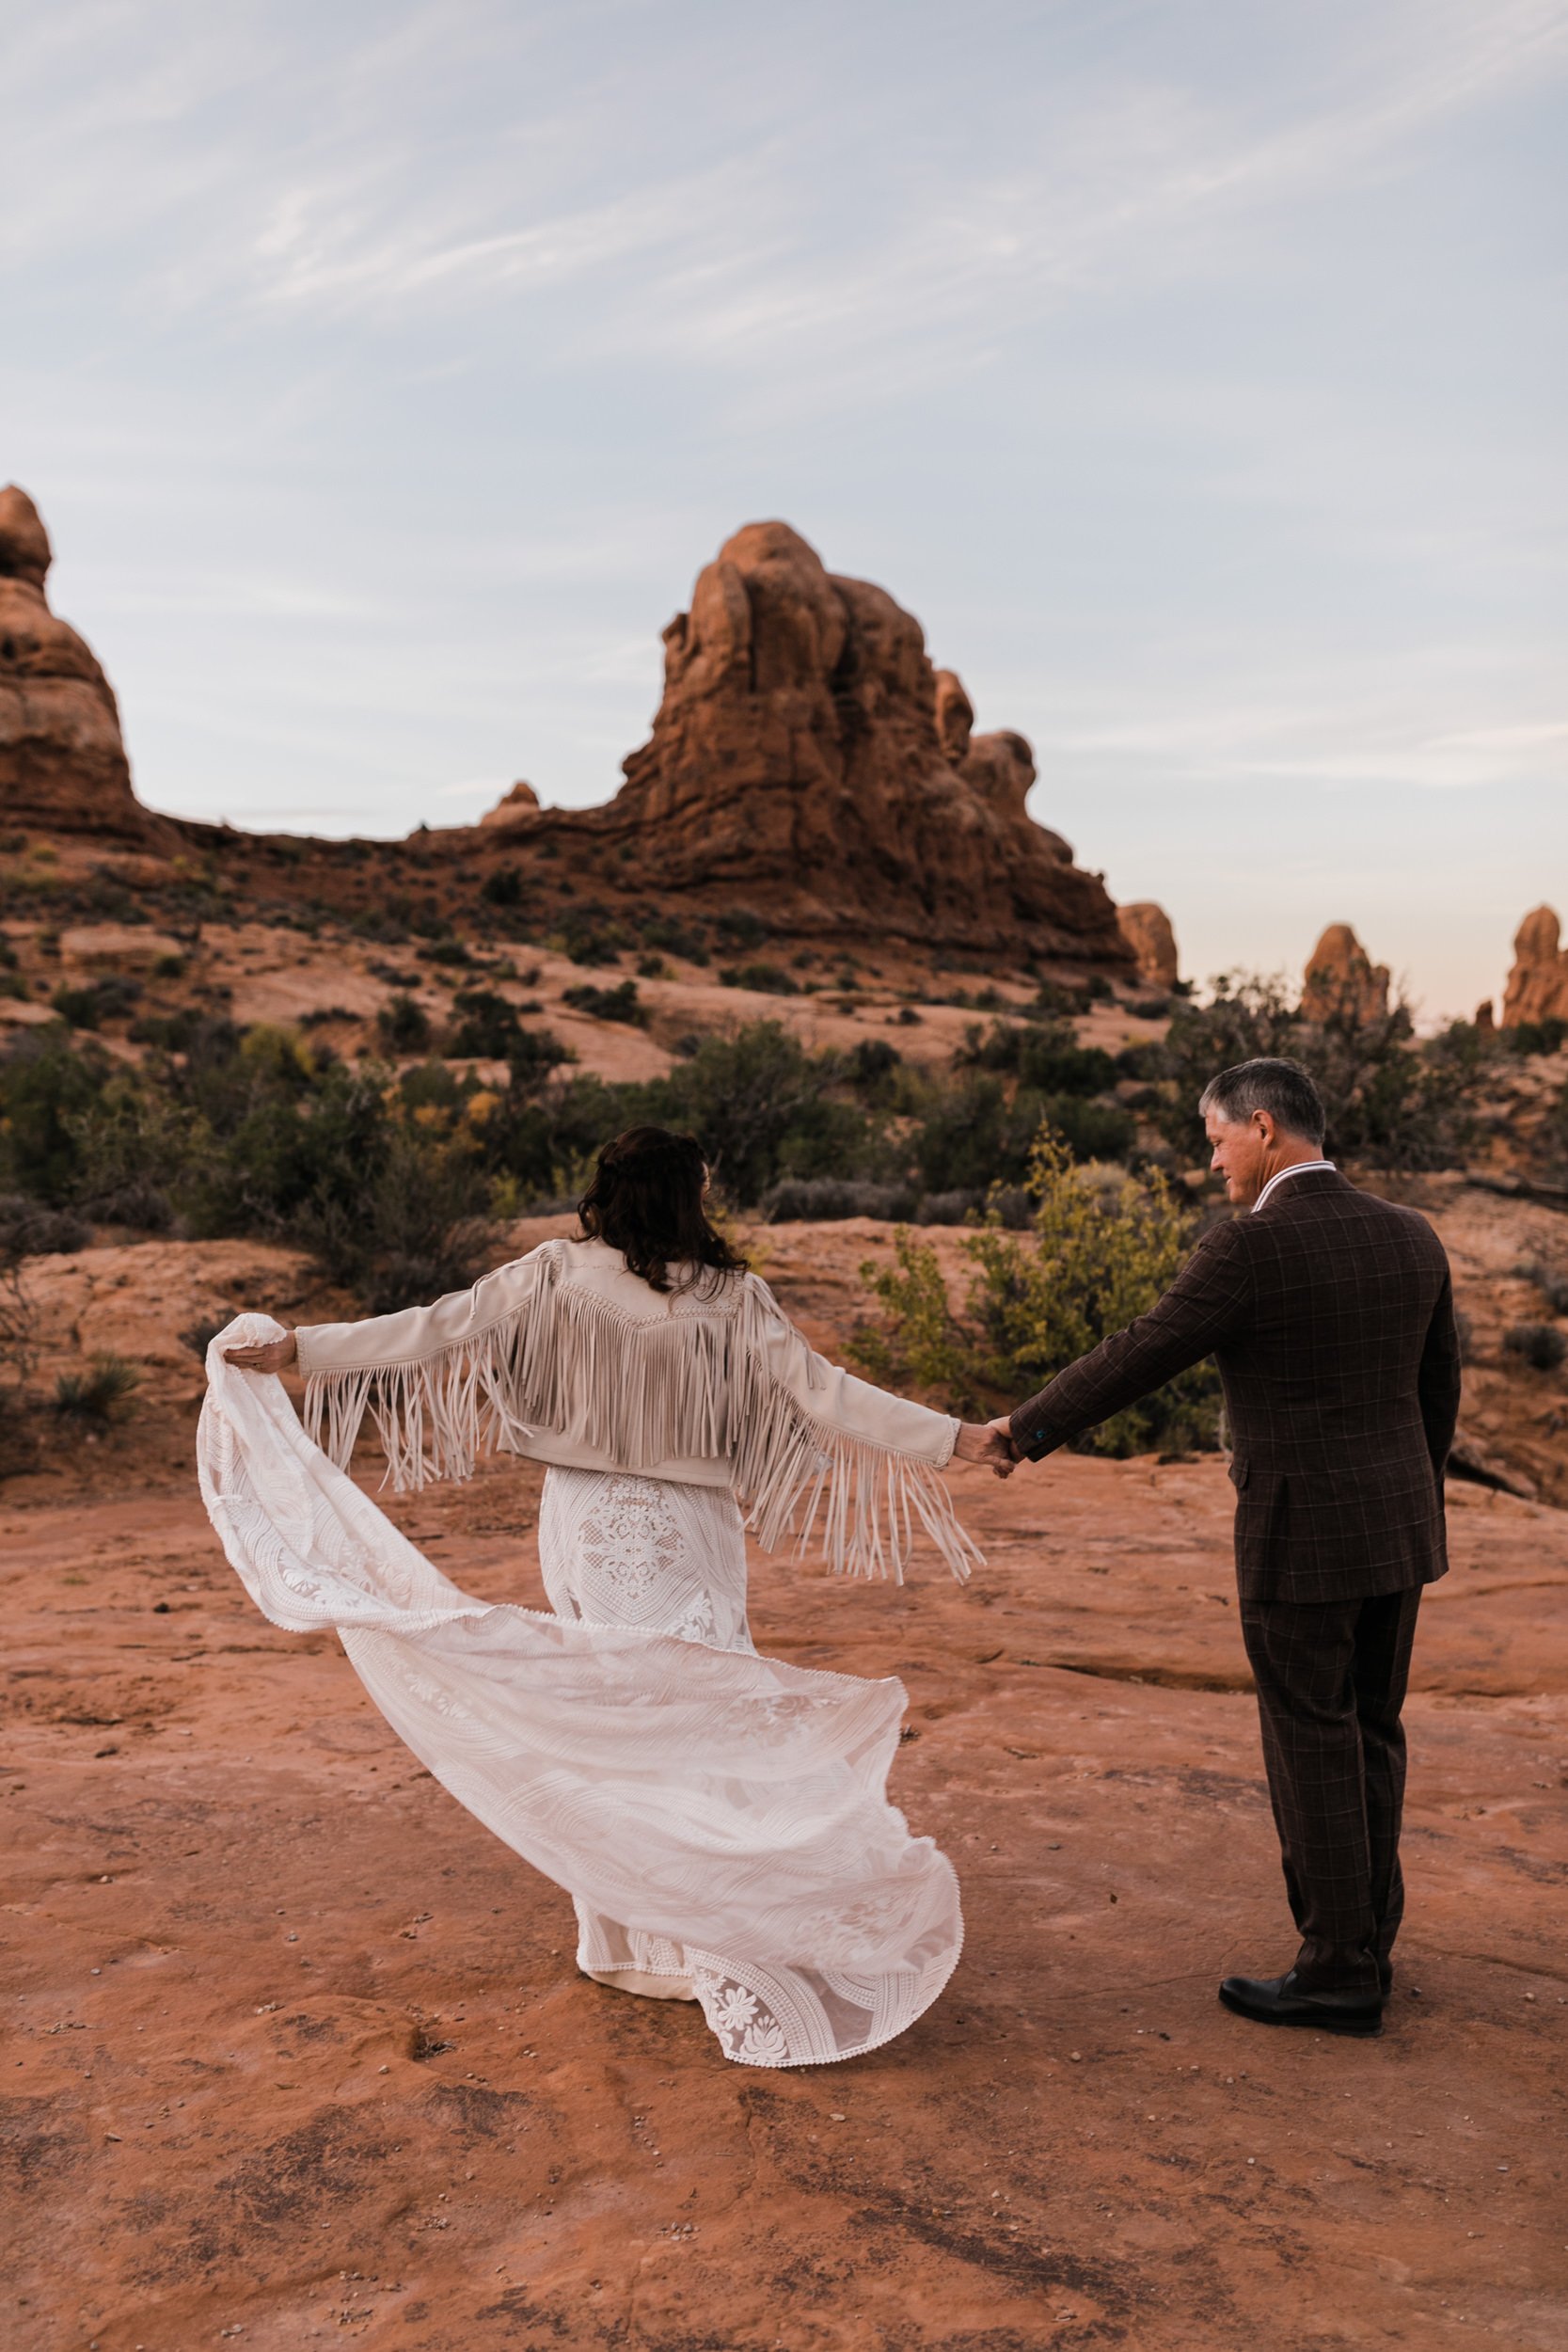 Moab &amp; Amangiri Roadtrip Elopement to Arches National Park | The Hearnes Adventure Photography